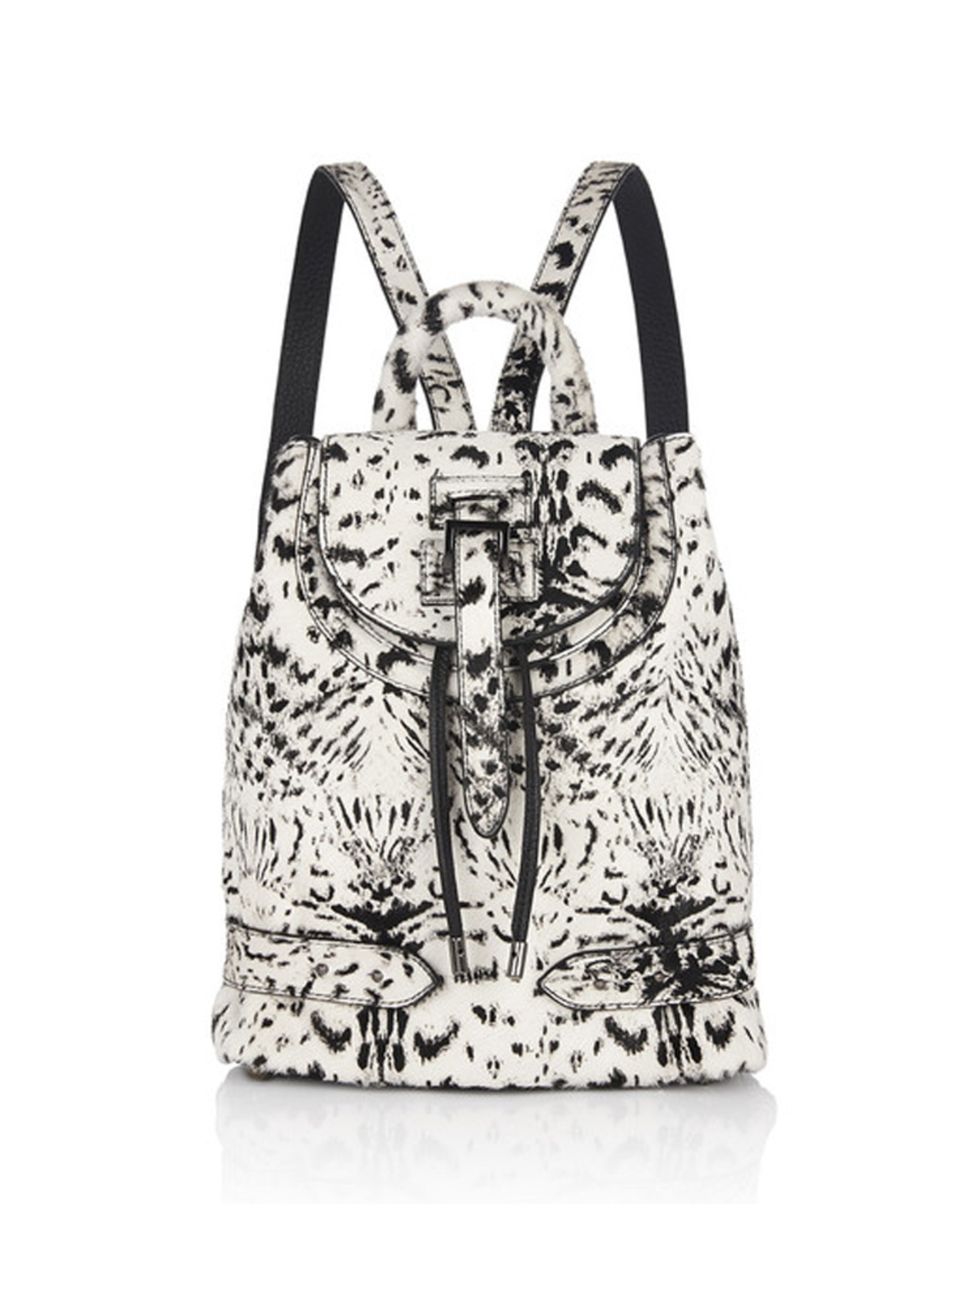 <p>Printed perfection from bag brand to watch Meli Melo.</p>

<p><a href="http://www.melimelo.com/collections/new-arrivals/products/backpack-mini-in-black-white-deville" target="_blank">Meli Melo</a> backpack, £695</p>